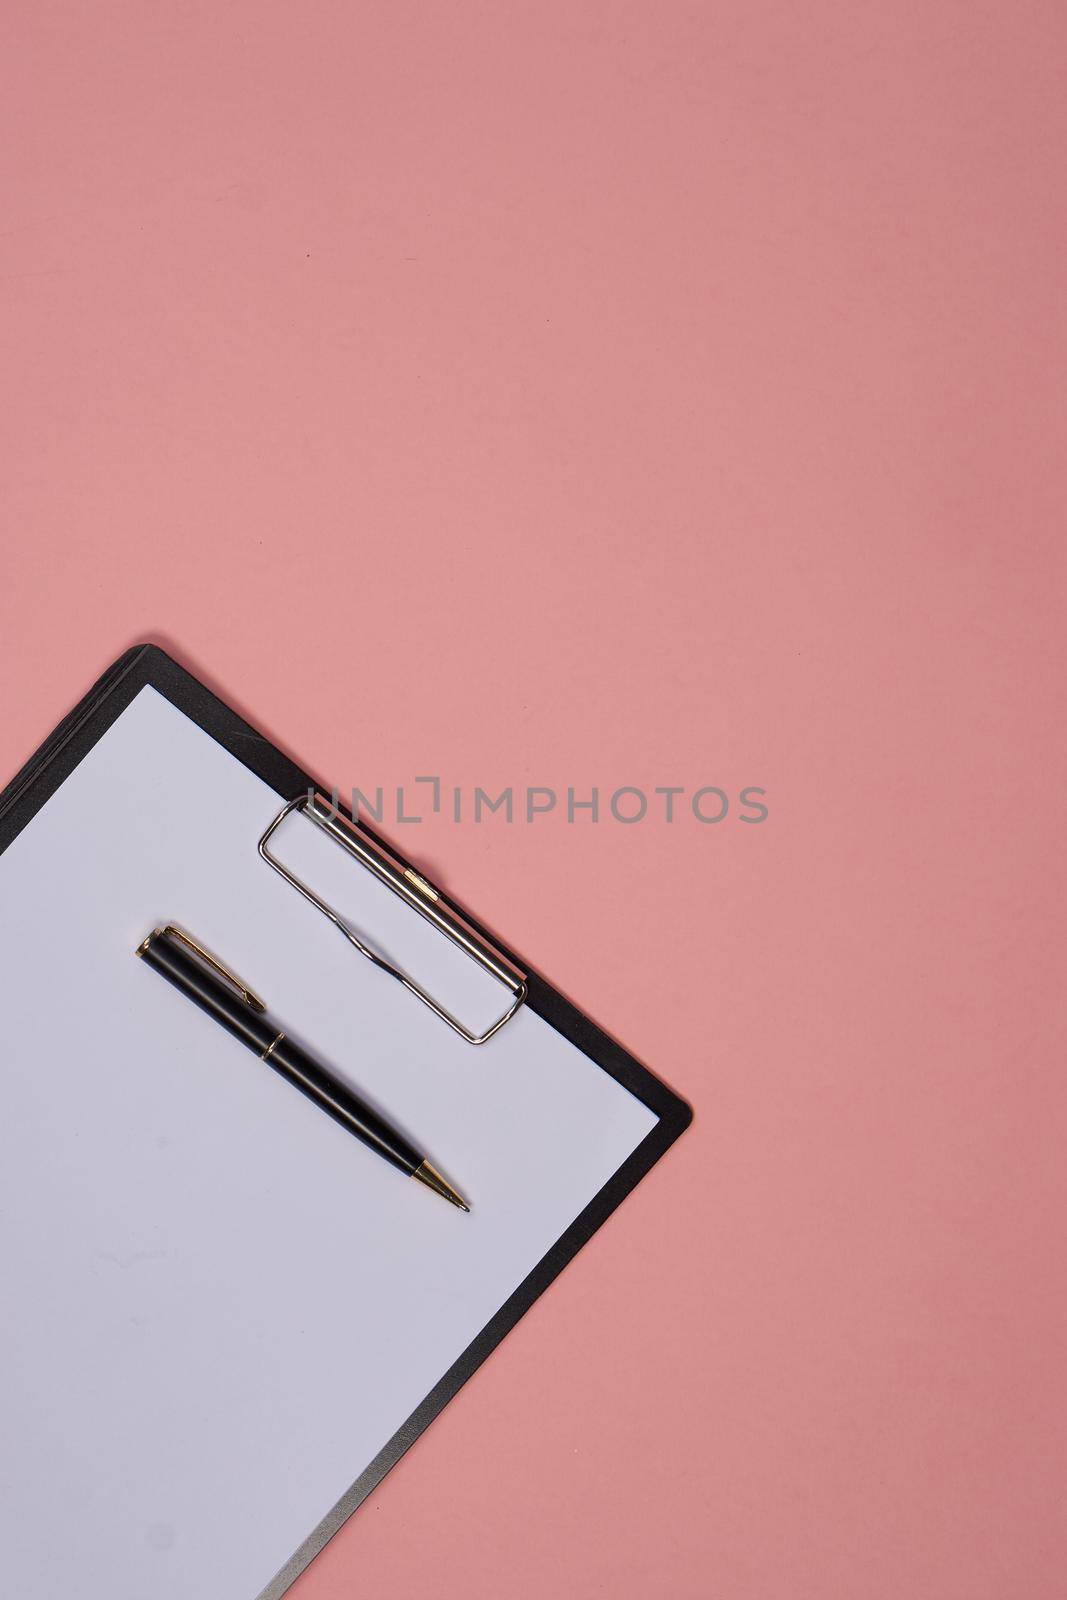 documents office folder for papers Studio Design Business tools. High quality photo